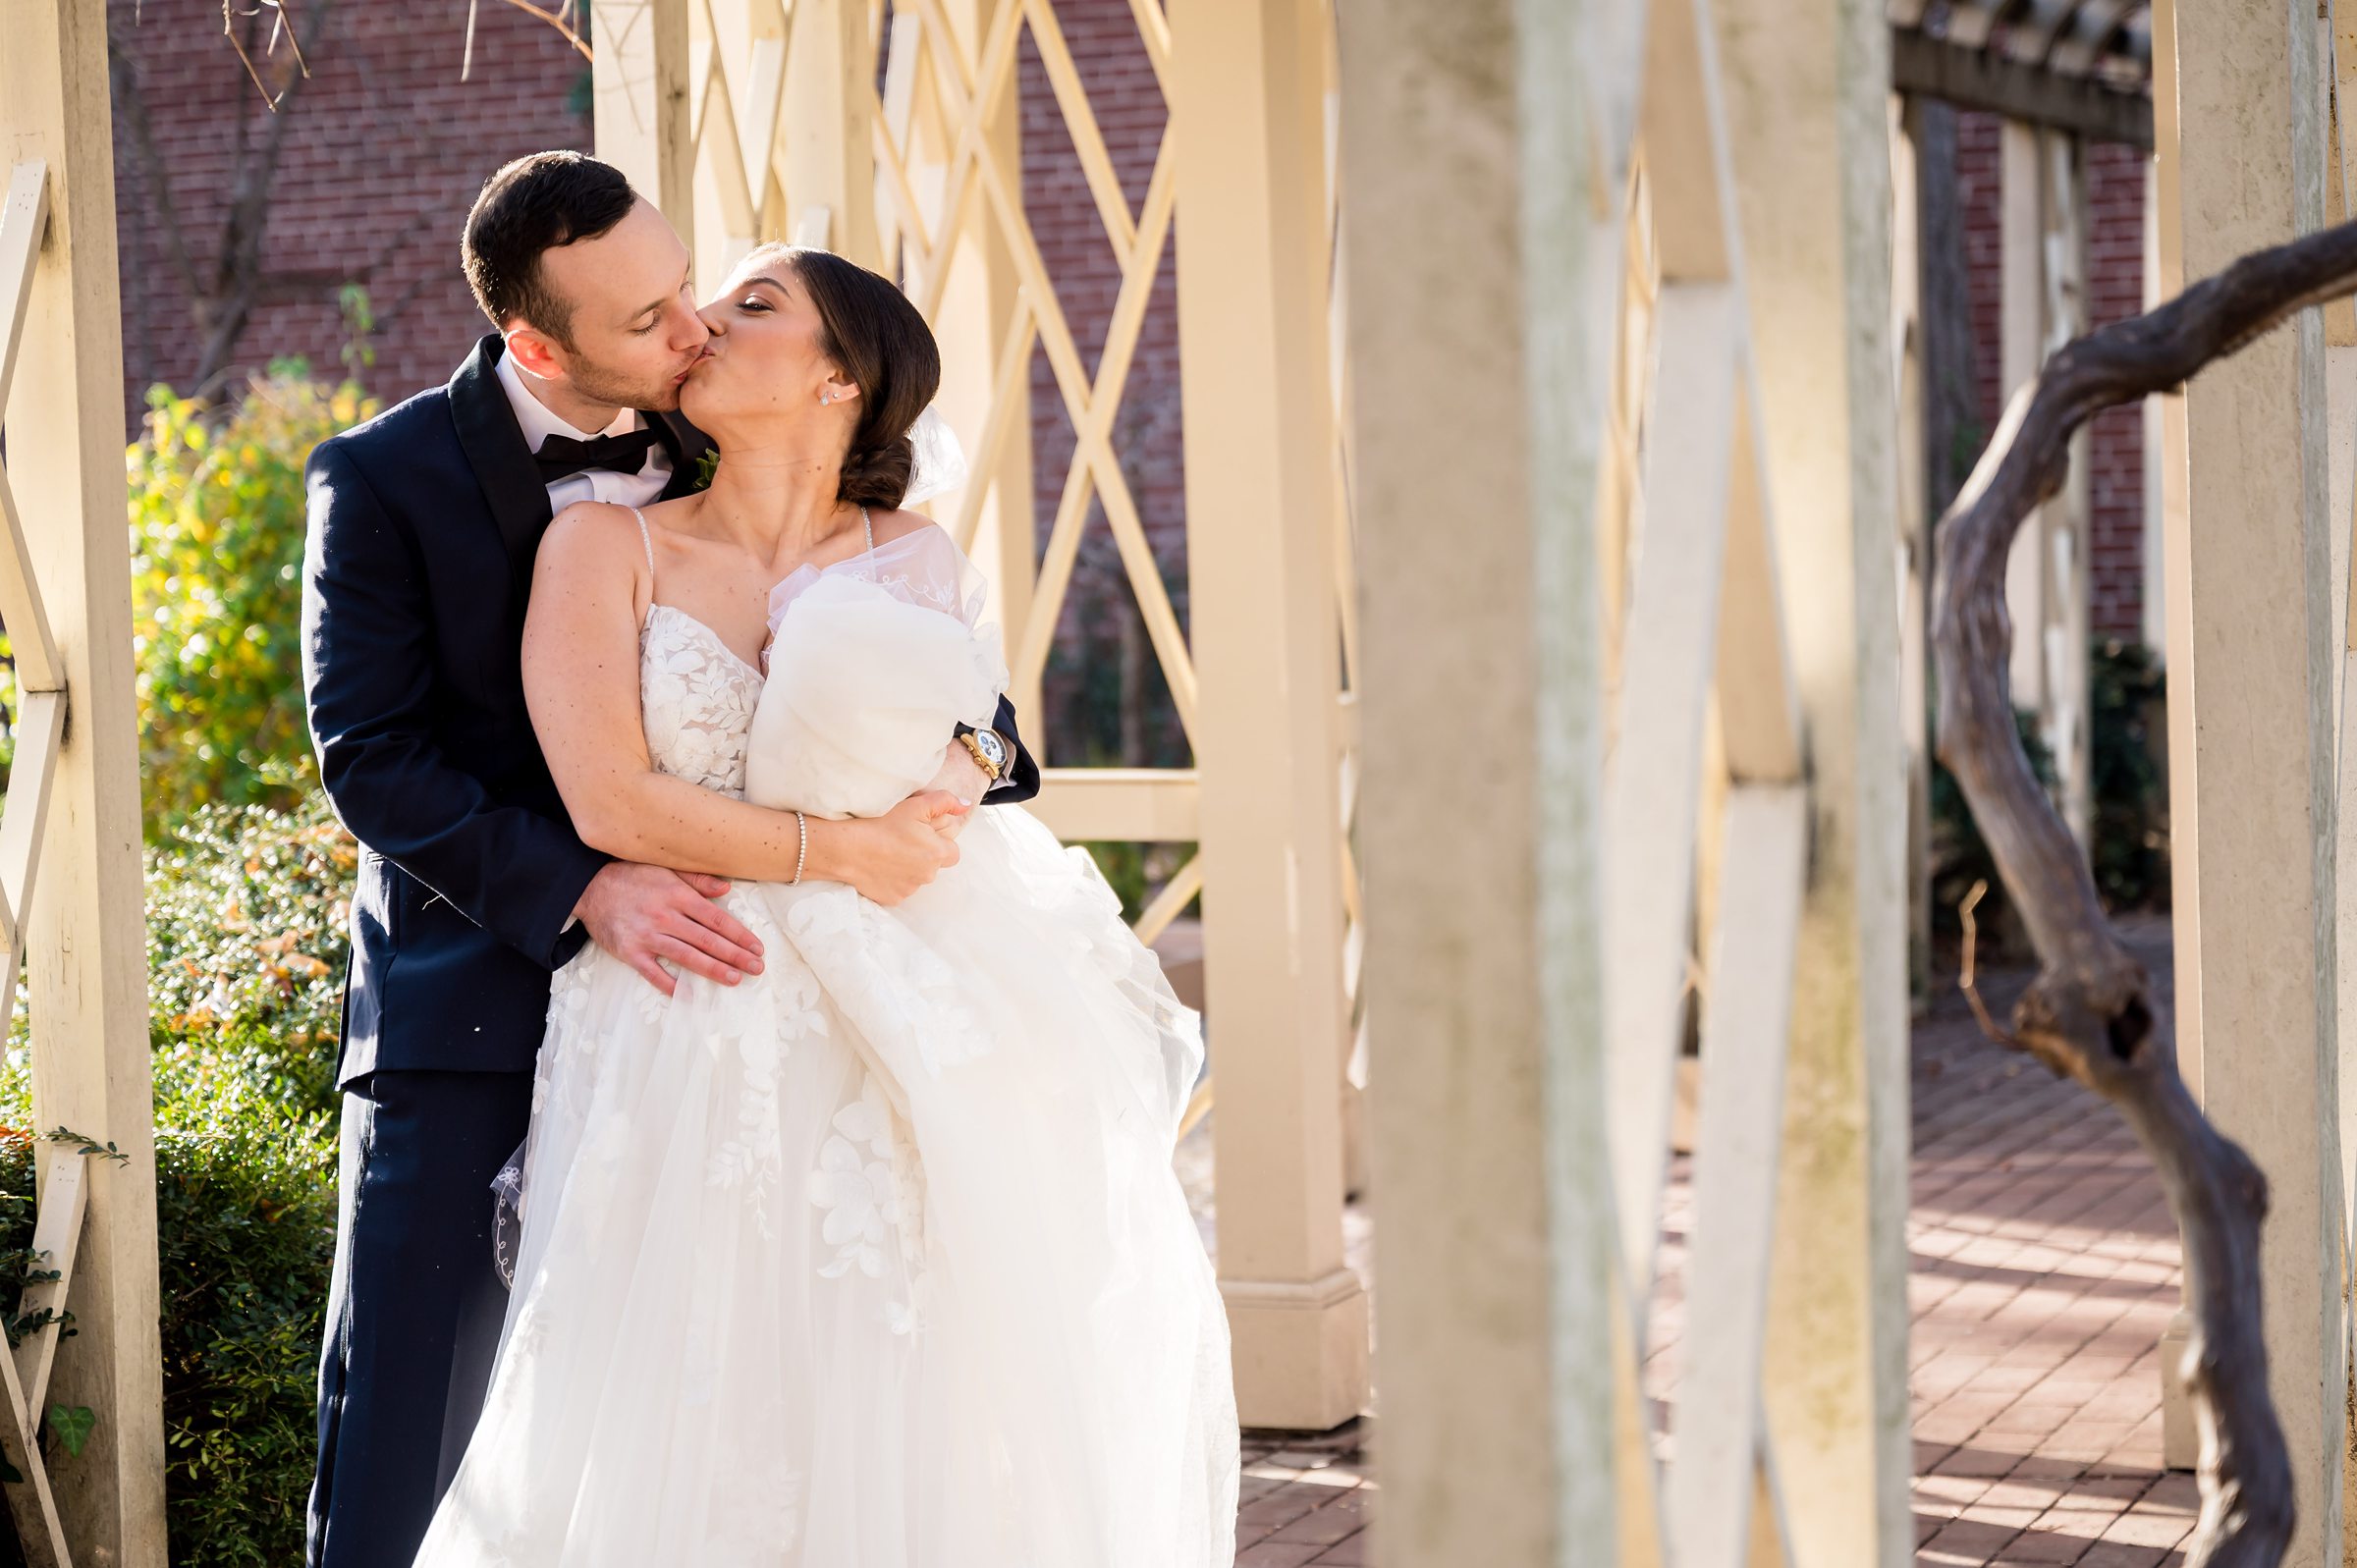 A bride and groom share a kiss in front of a gazebo at a Lilah Events wedding.